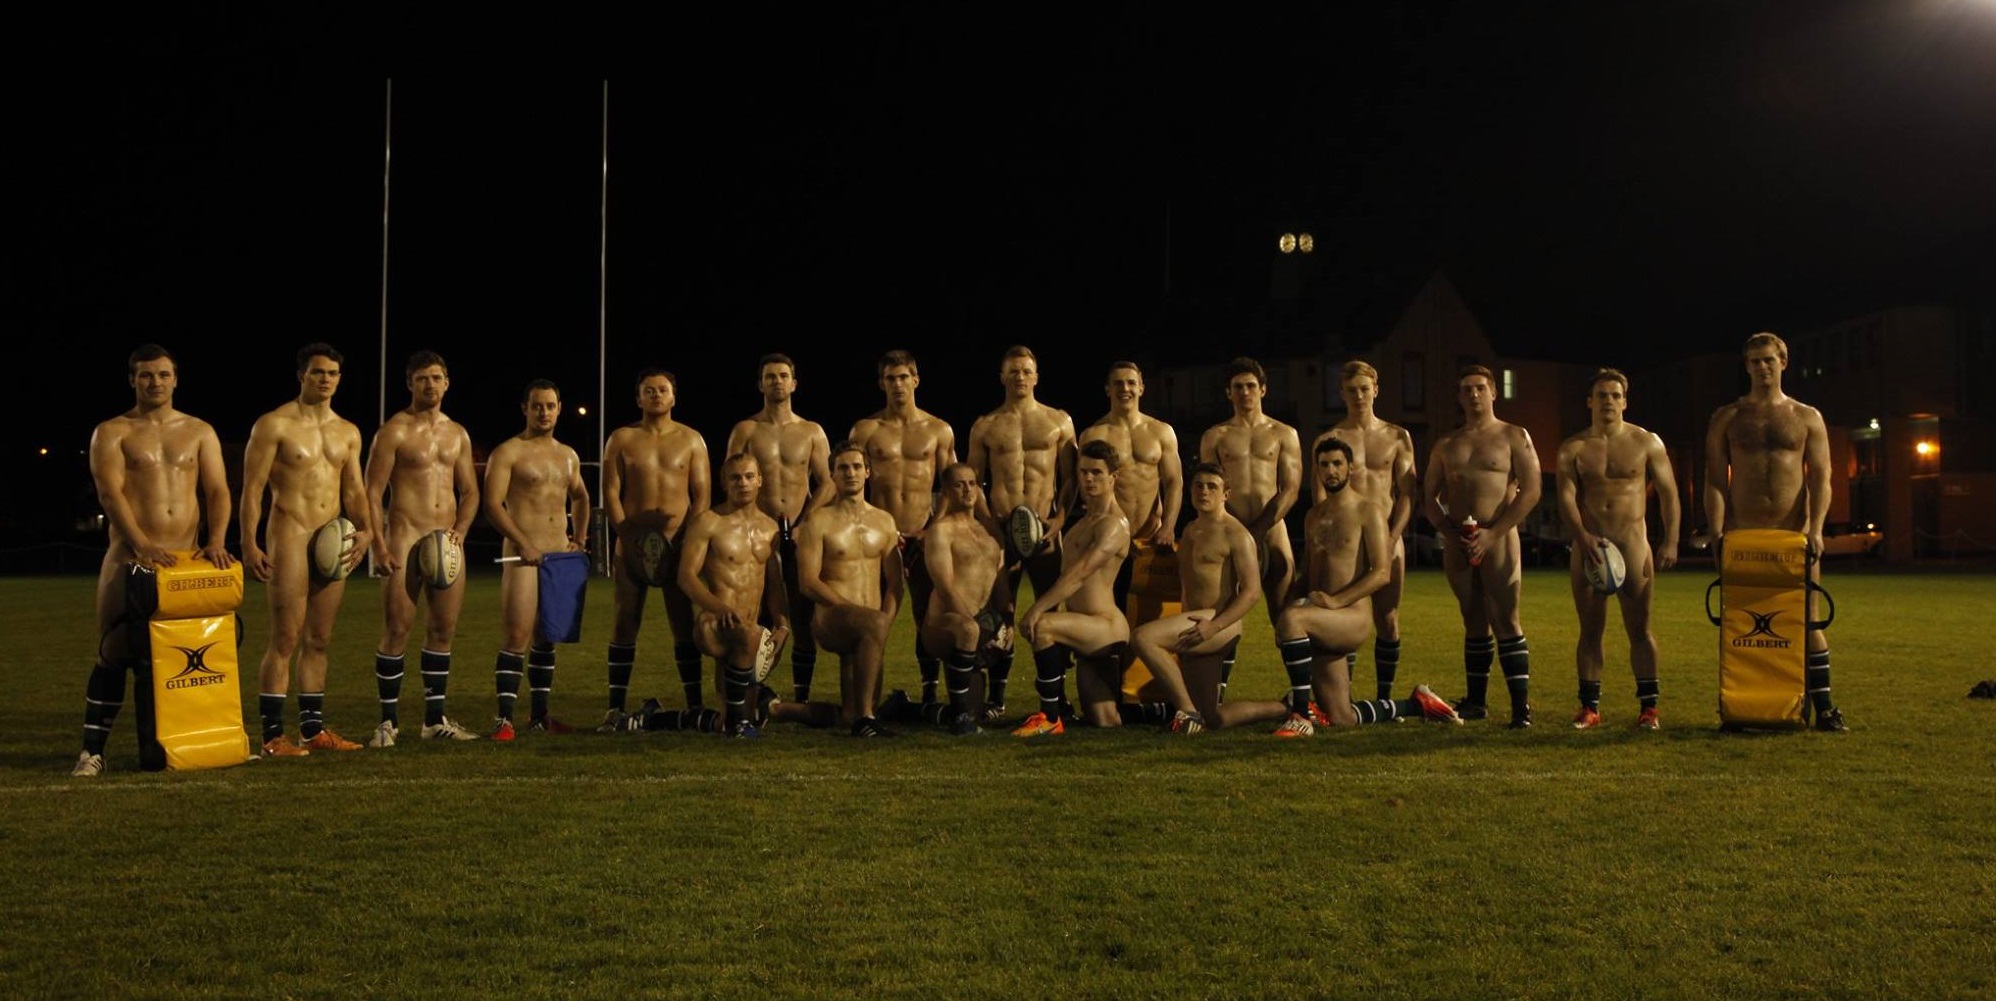 UK Sports Teams Naked for Charity